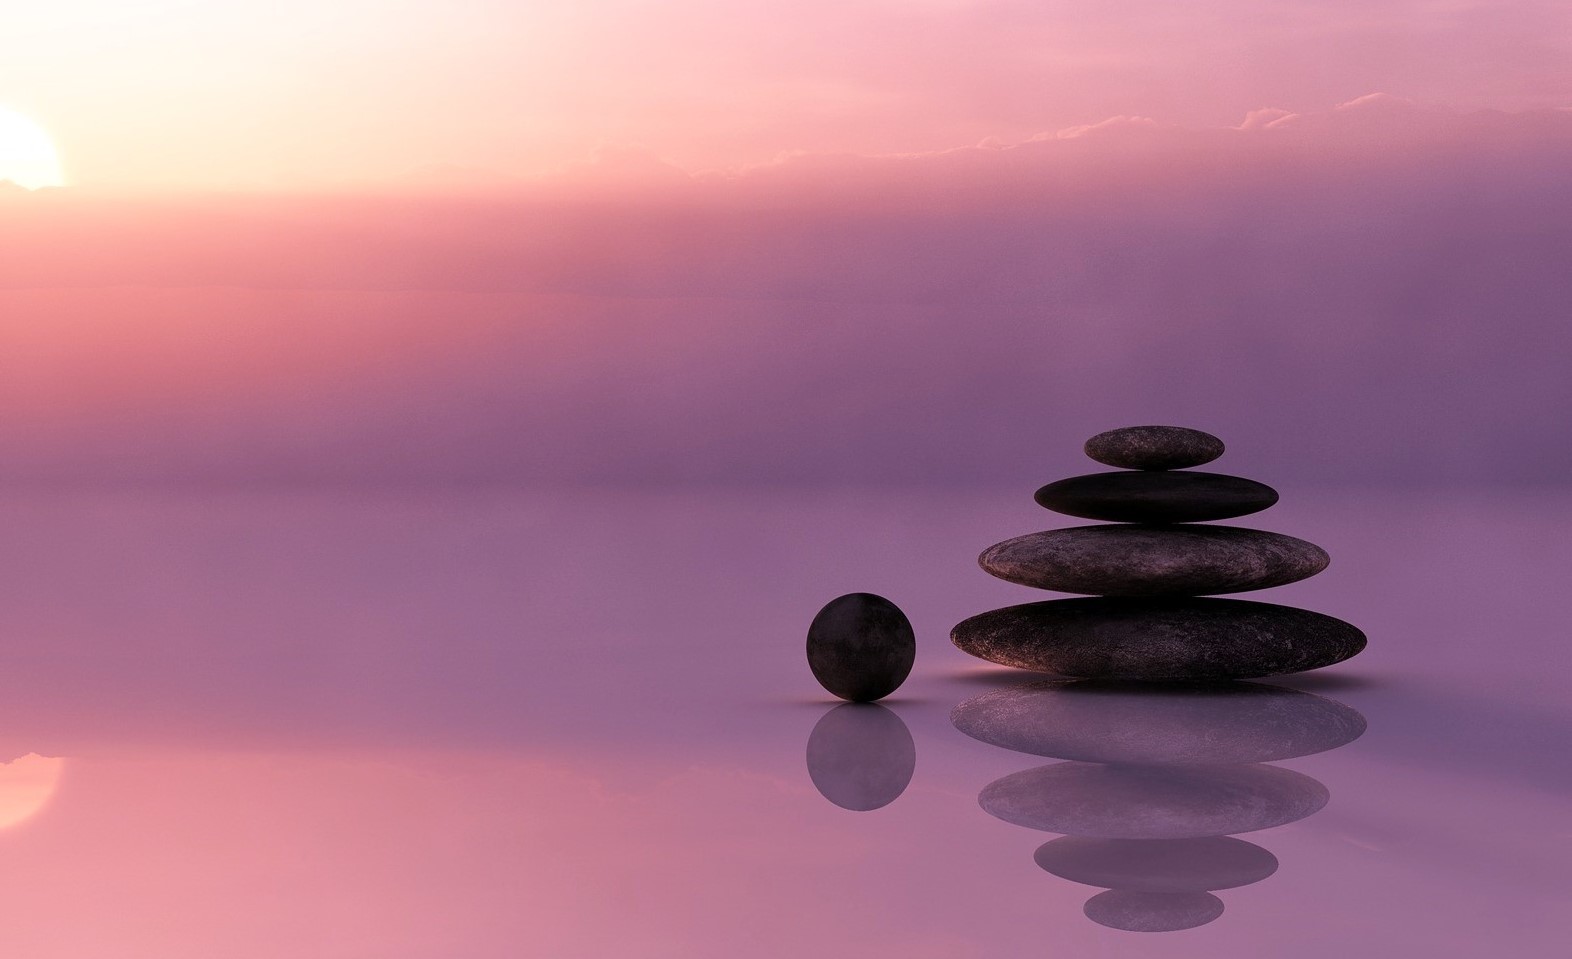 A pile of stones in front of pink, serene water.